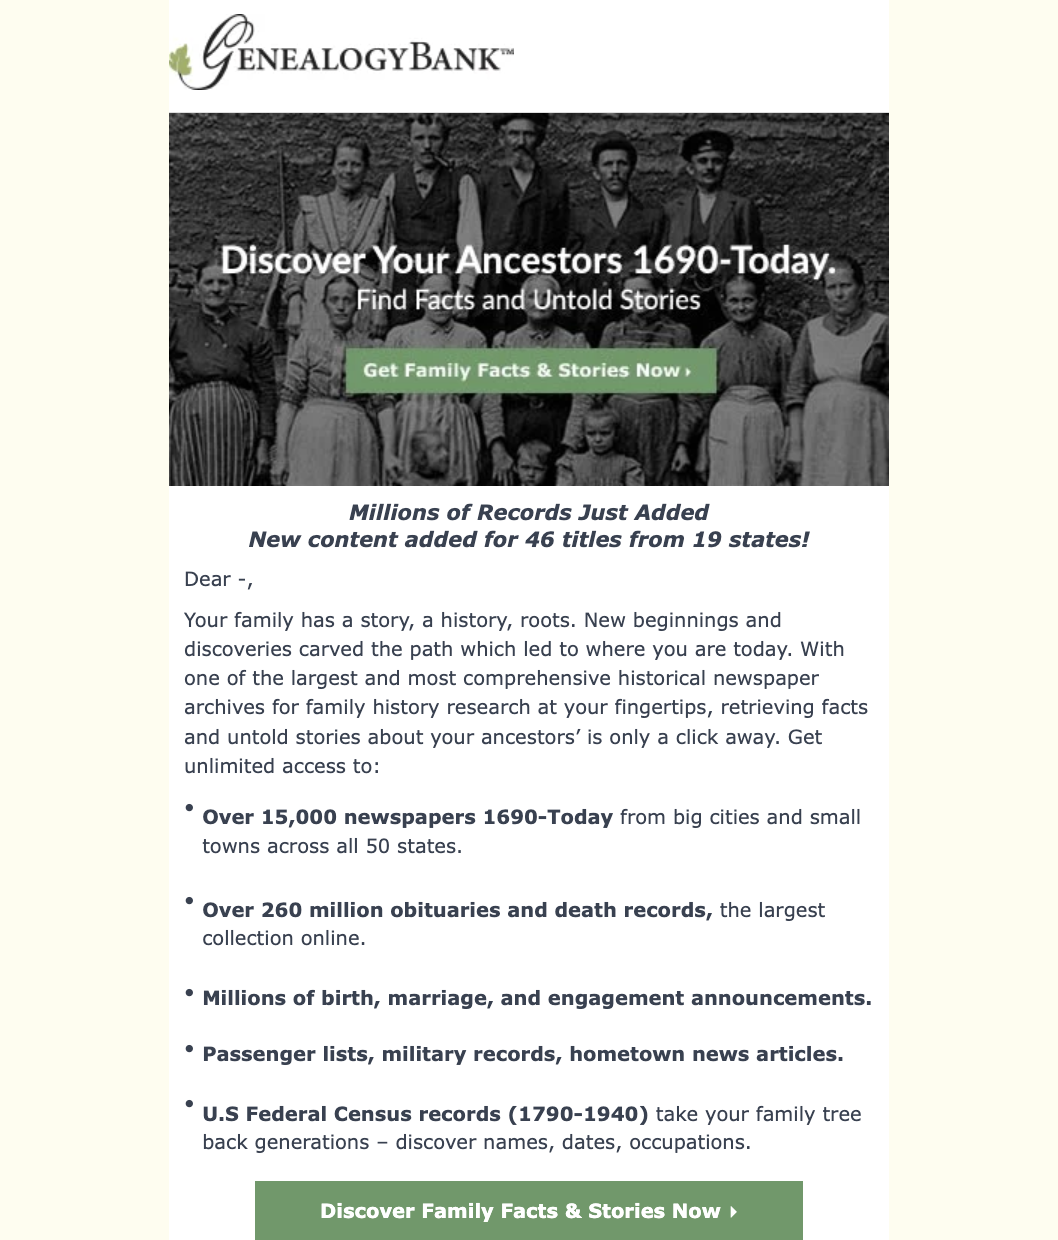 A screenshot of an email from GenealogyBank.